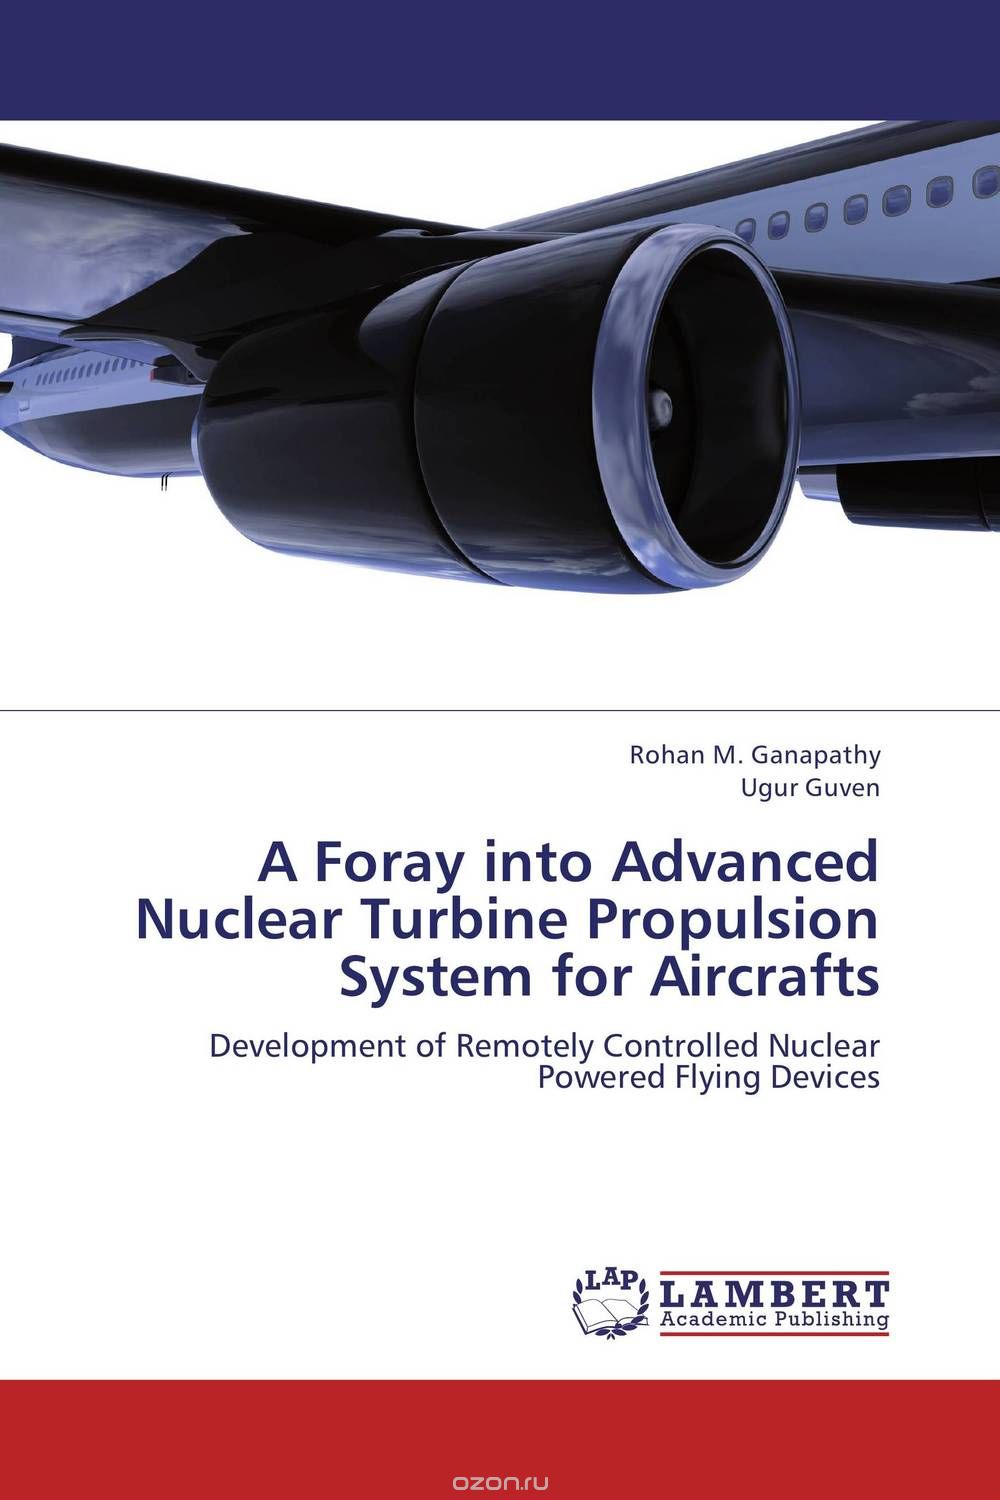 A Foray into Advanced Nuclear Turbine Propulsion System for Aircrafts